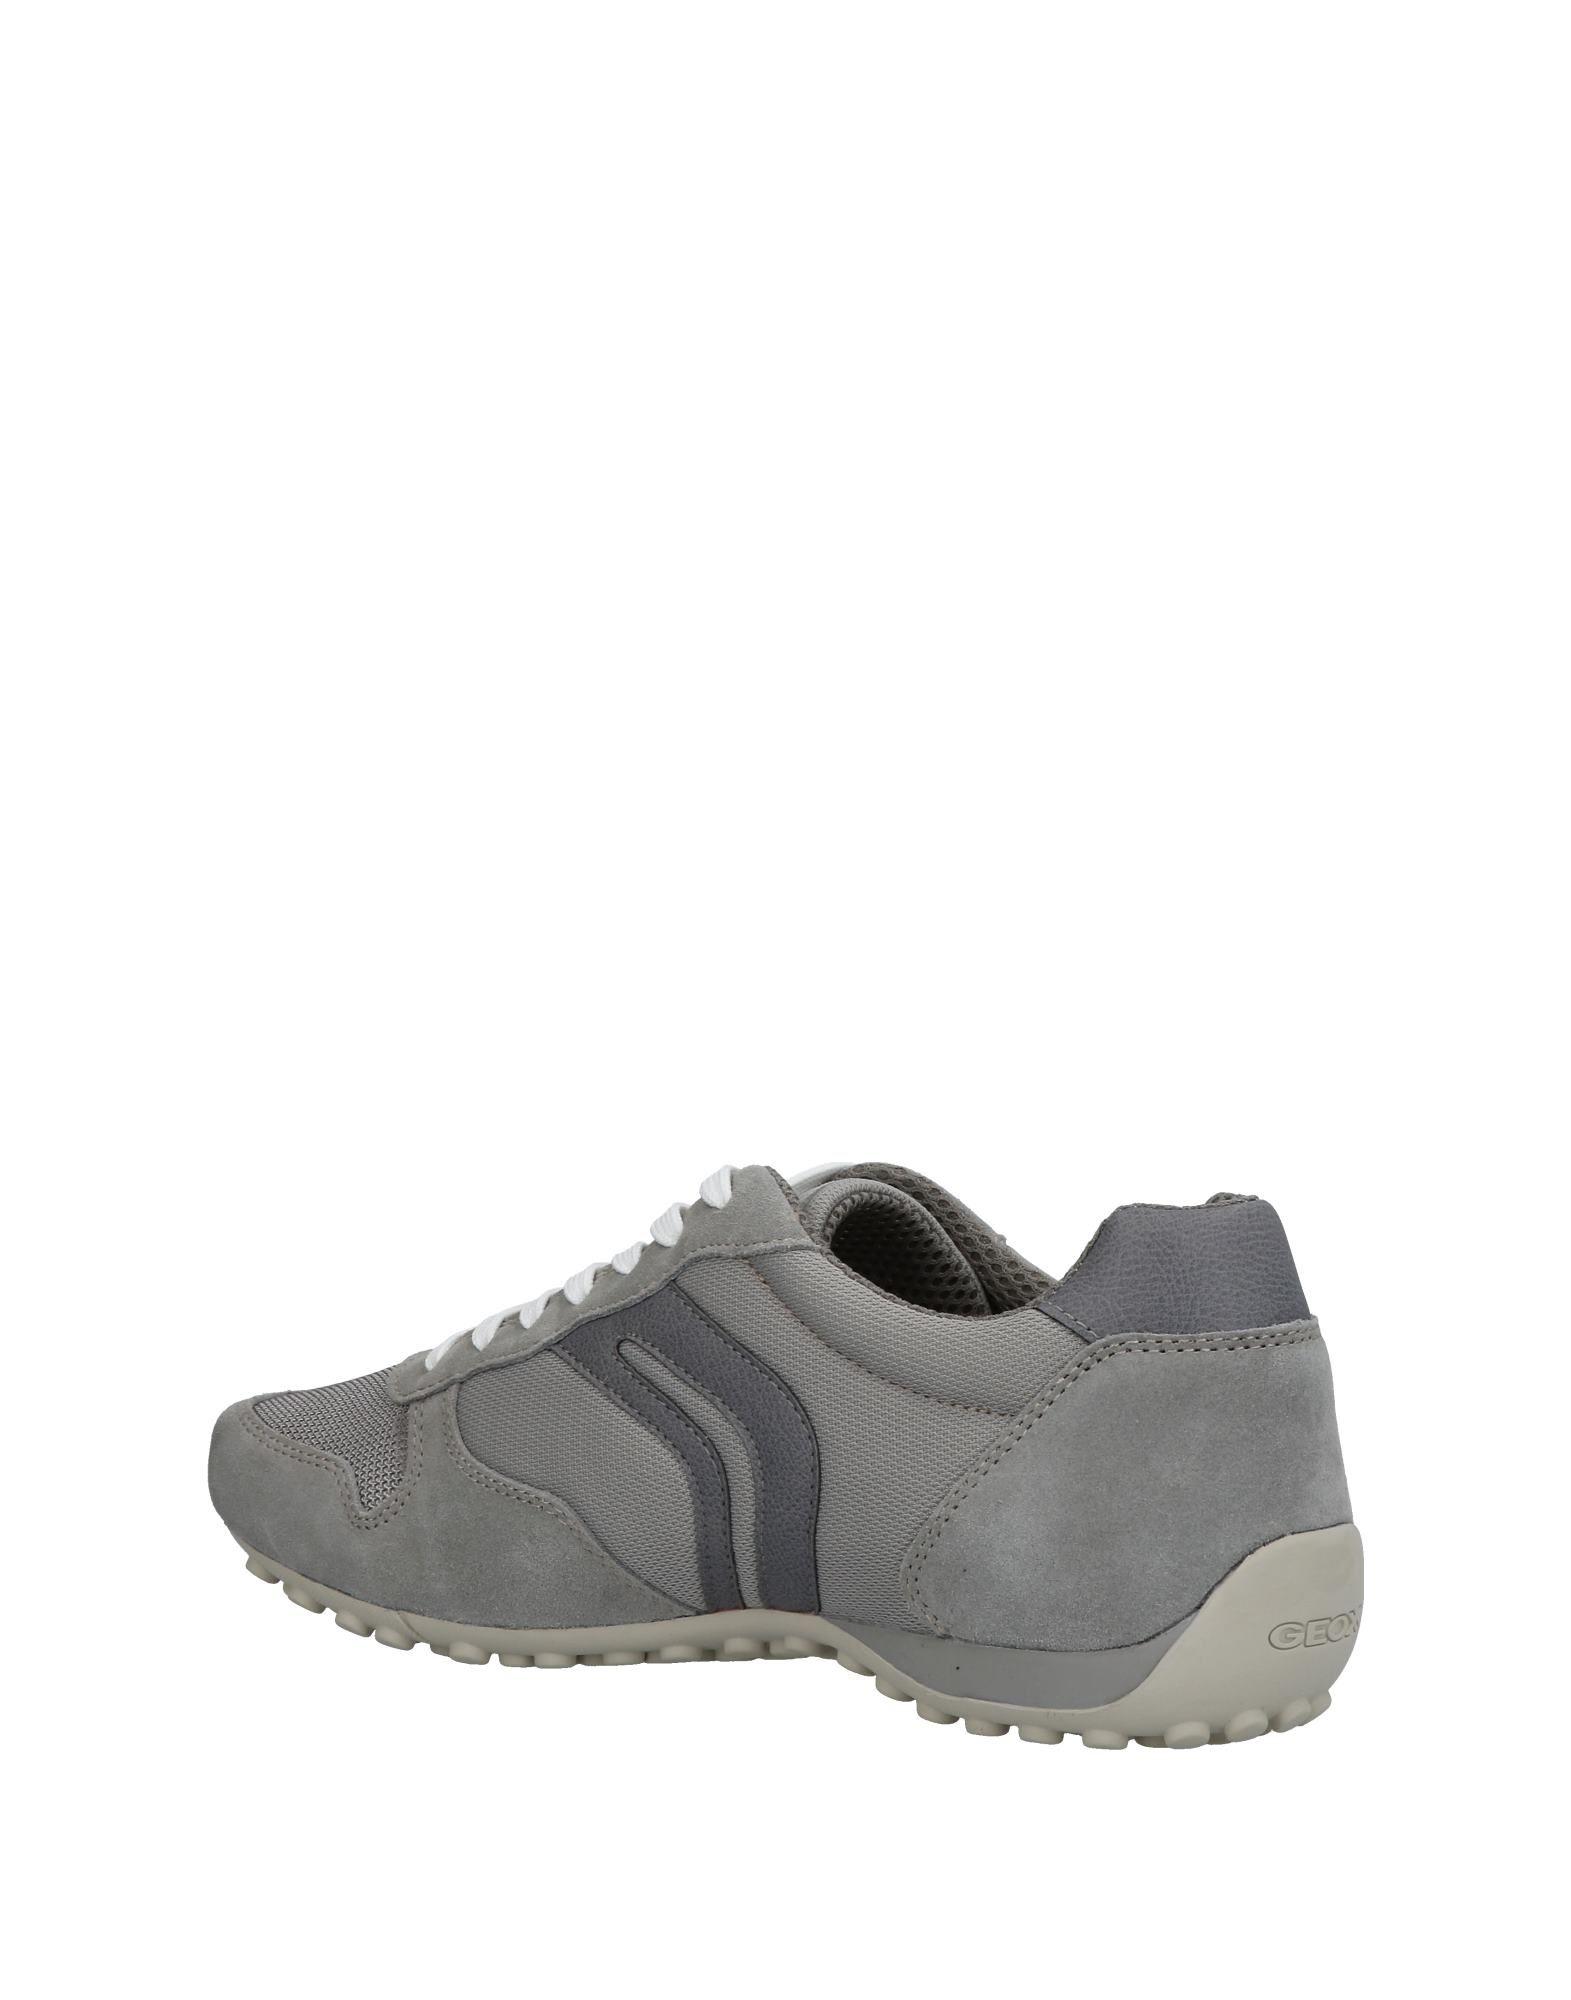 Geox Leather Low-tops & Sneakers in Lead (Gray) for Men - Save 38% - Lyst